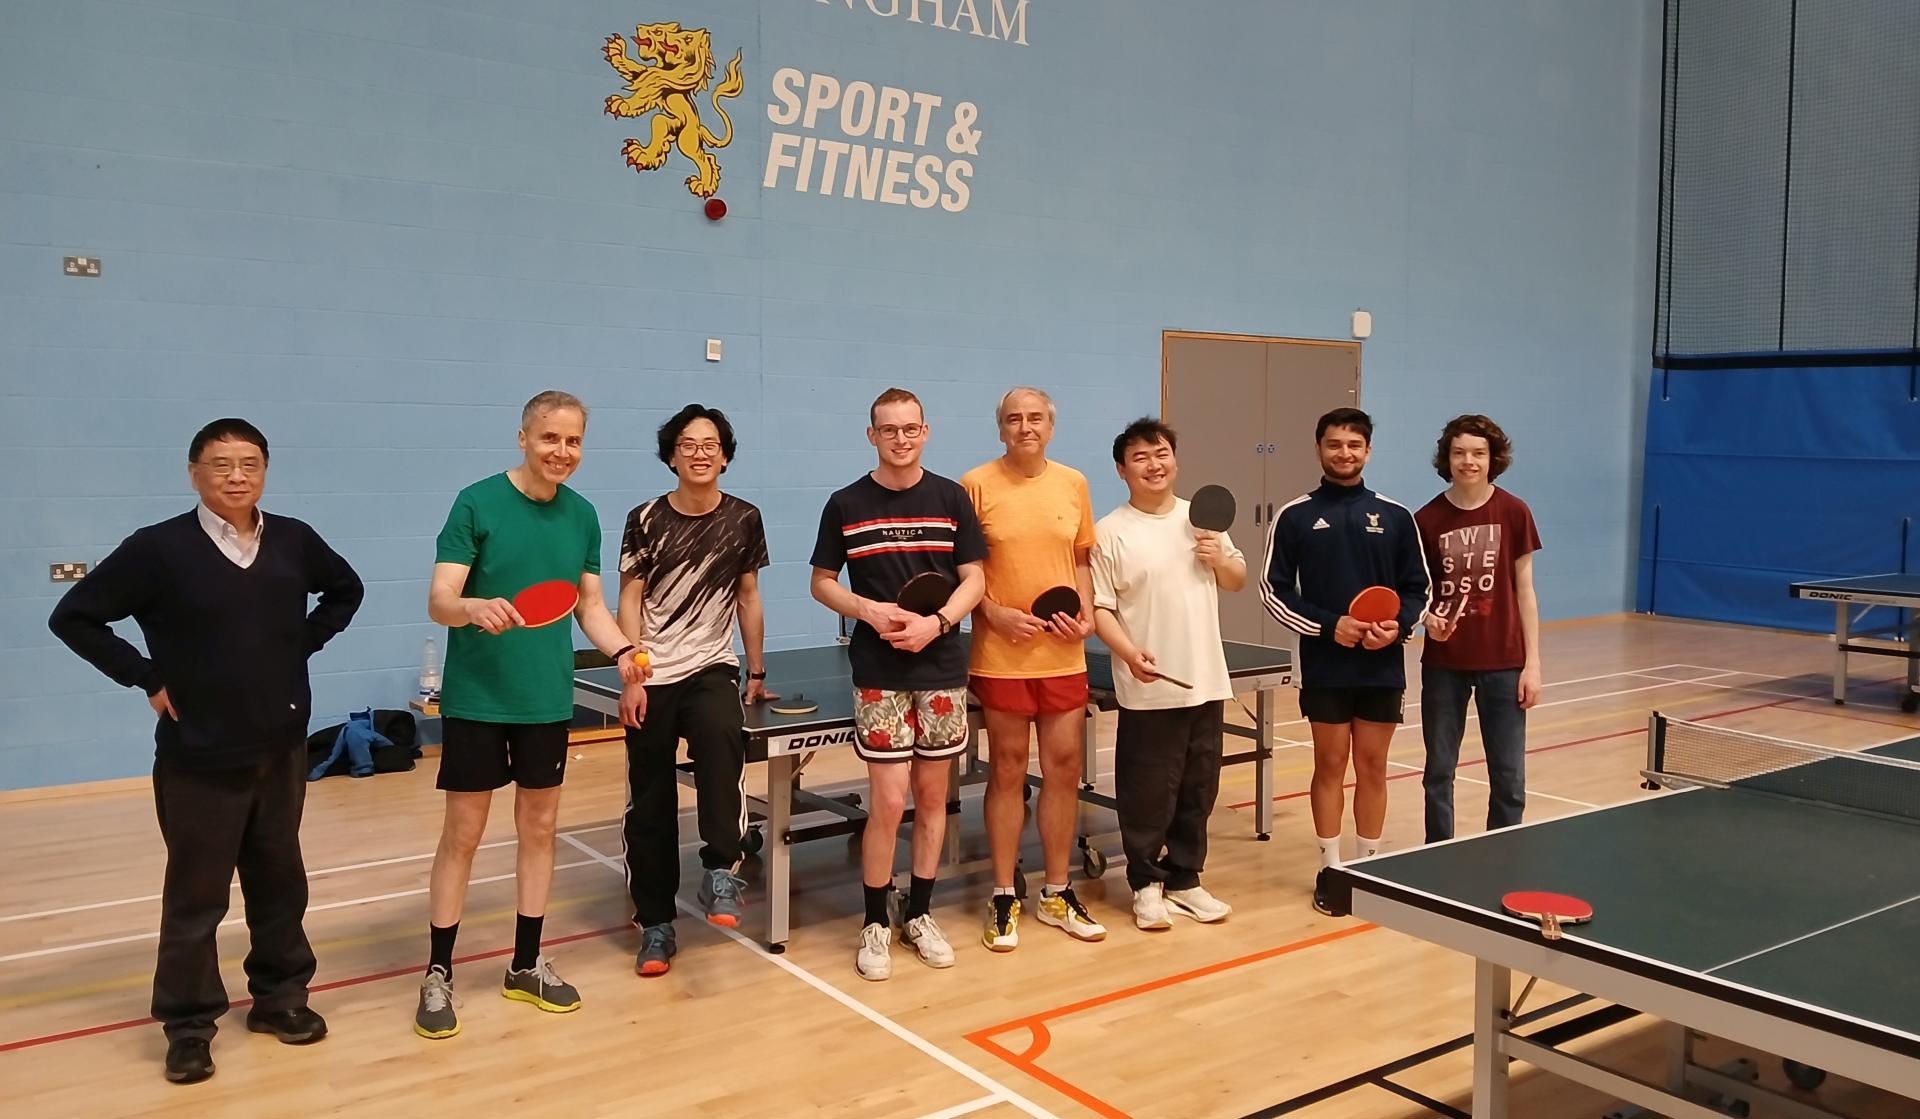 Table tennis players pose in front of University of Birmingham sign in gym